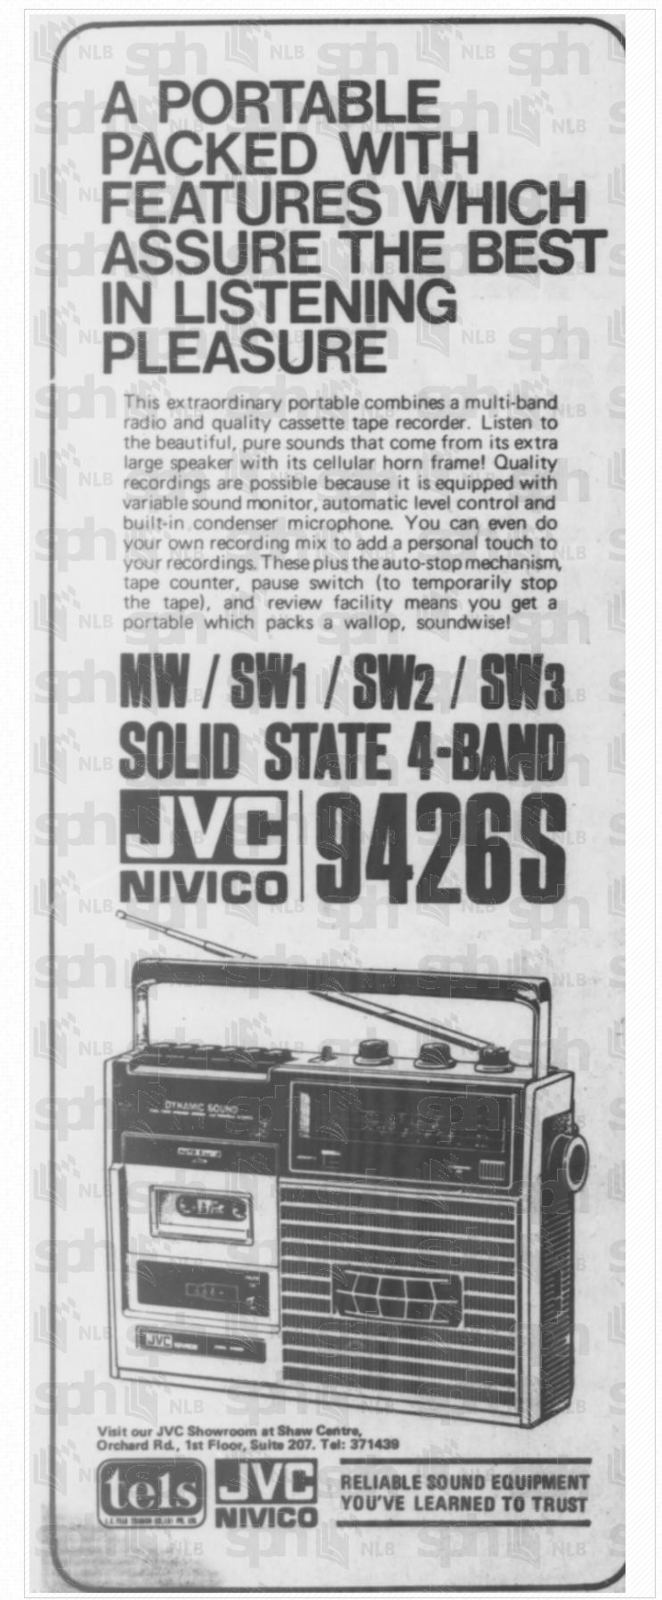 jvc 9426S from 1976.png